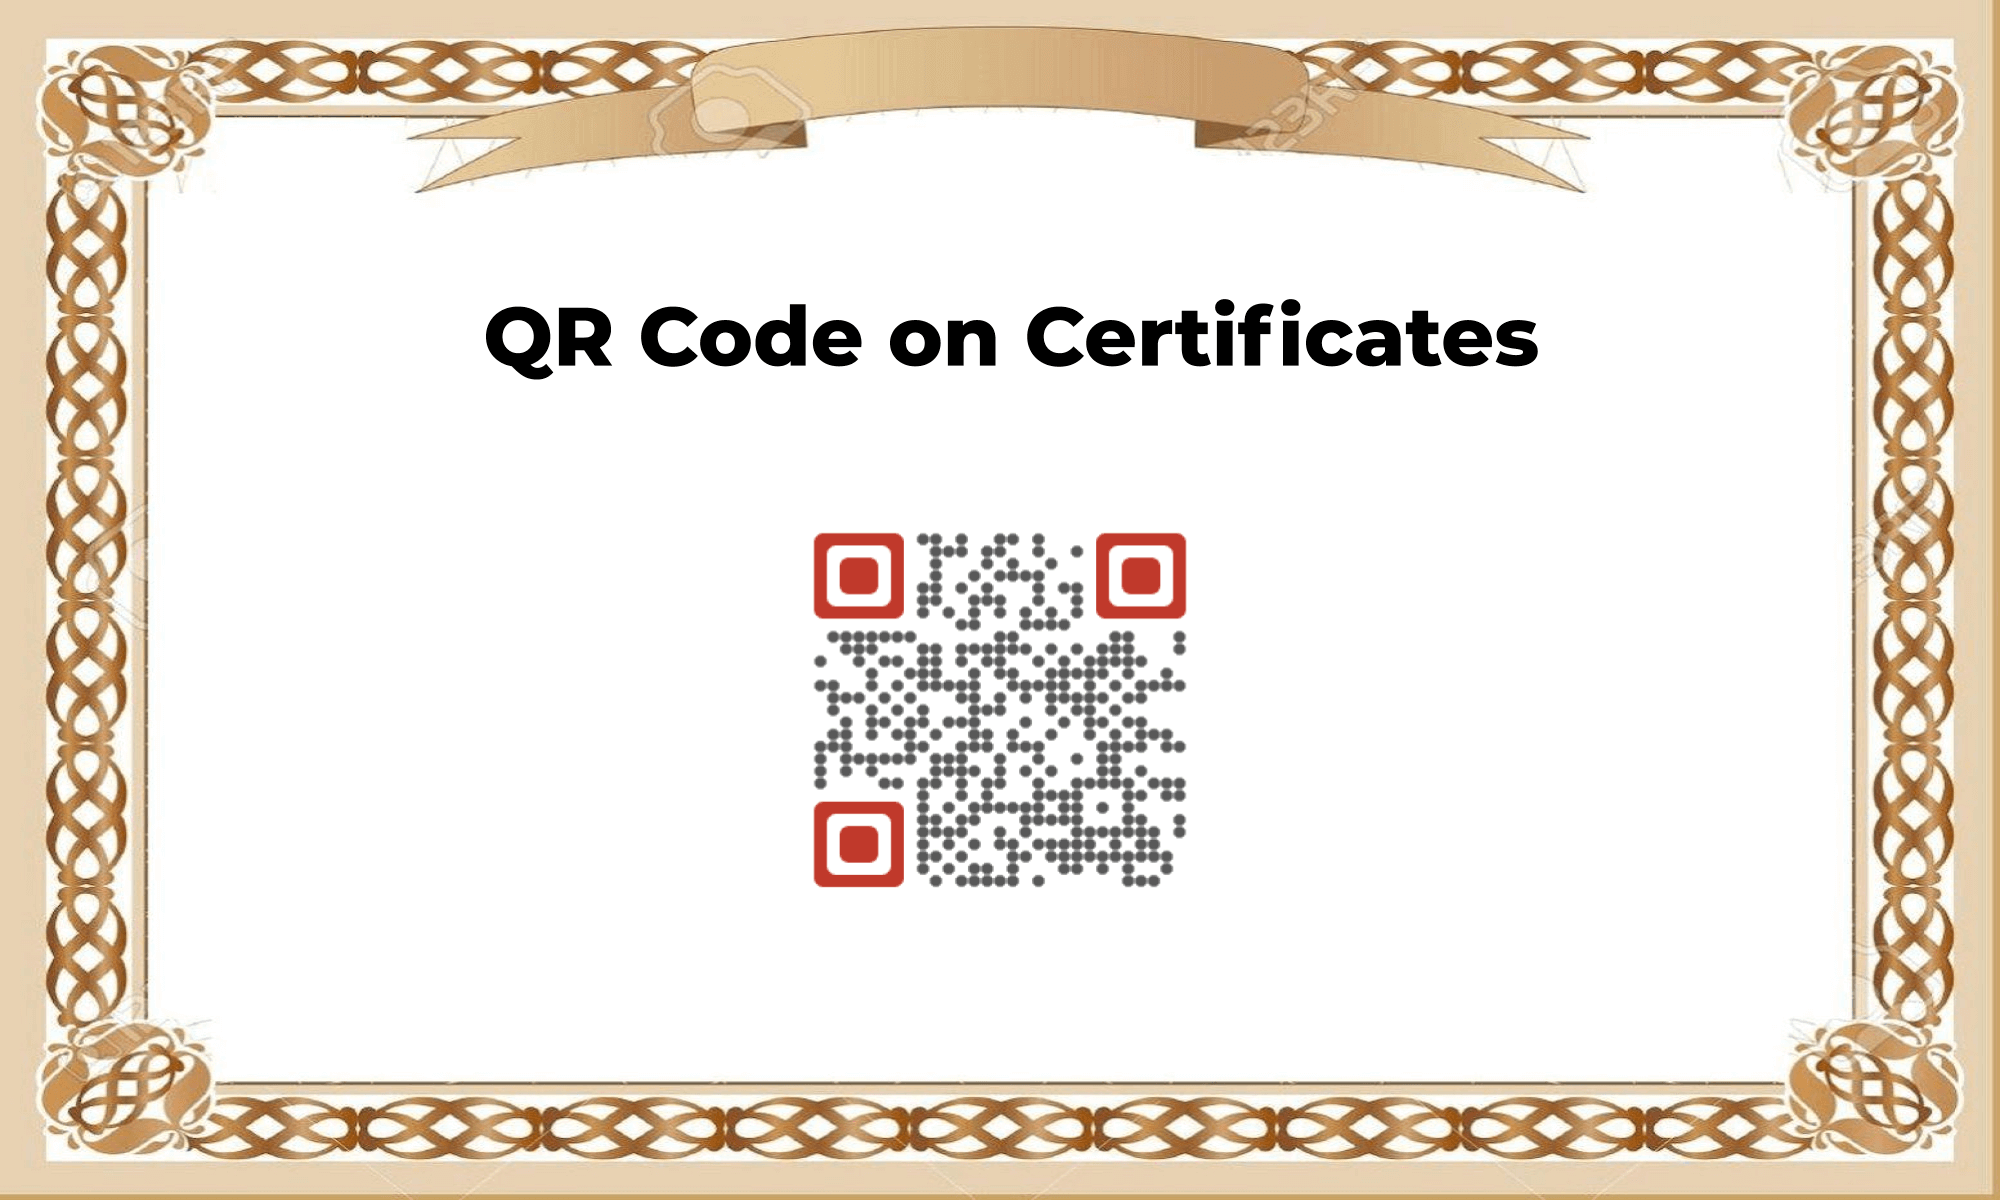 QR Codes On Certificates: How To Prevent Counterfeiting